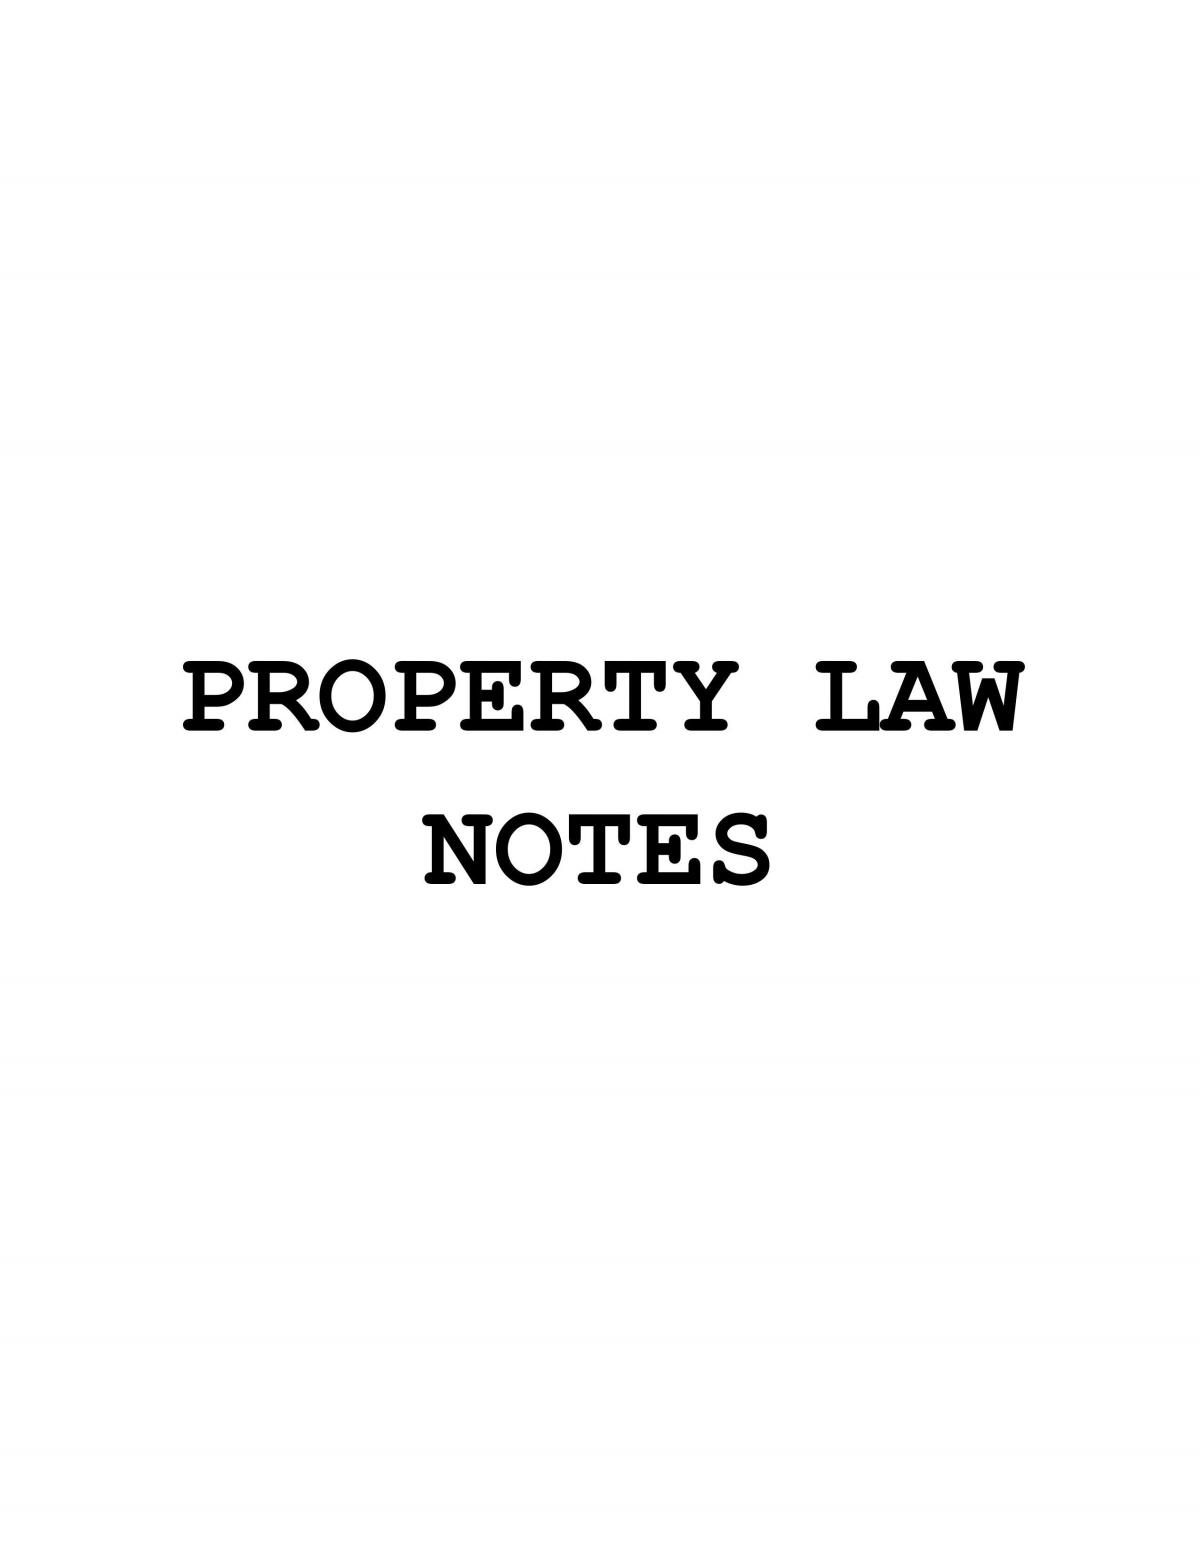 Property Law Notes  - Page 1